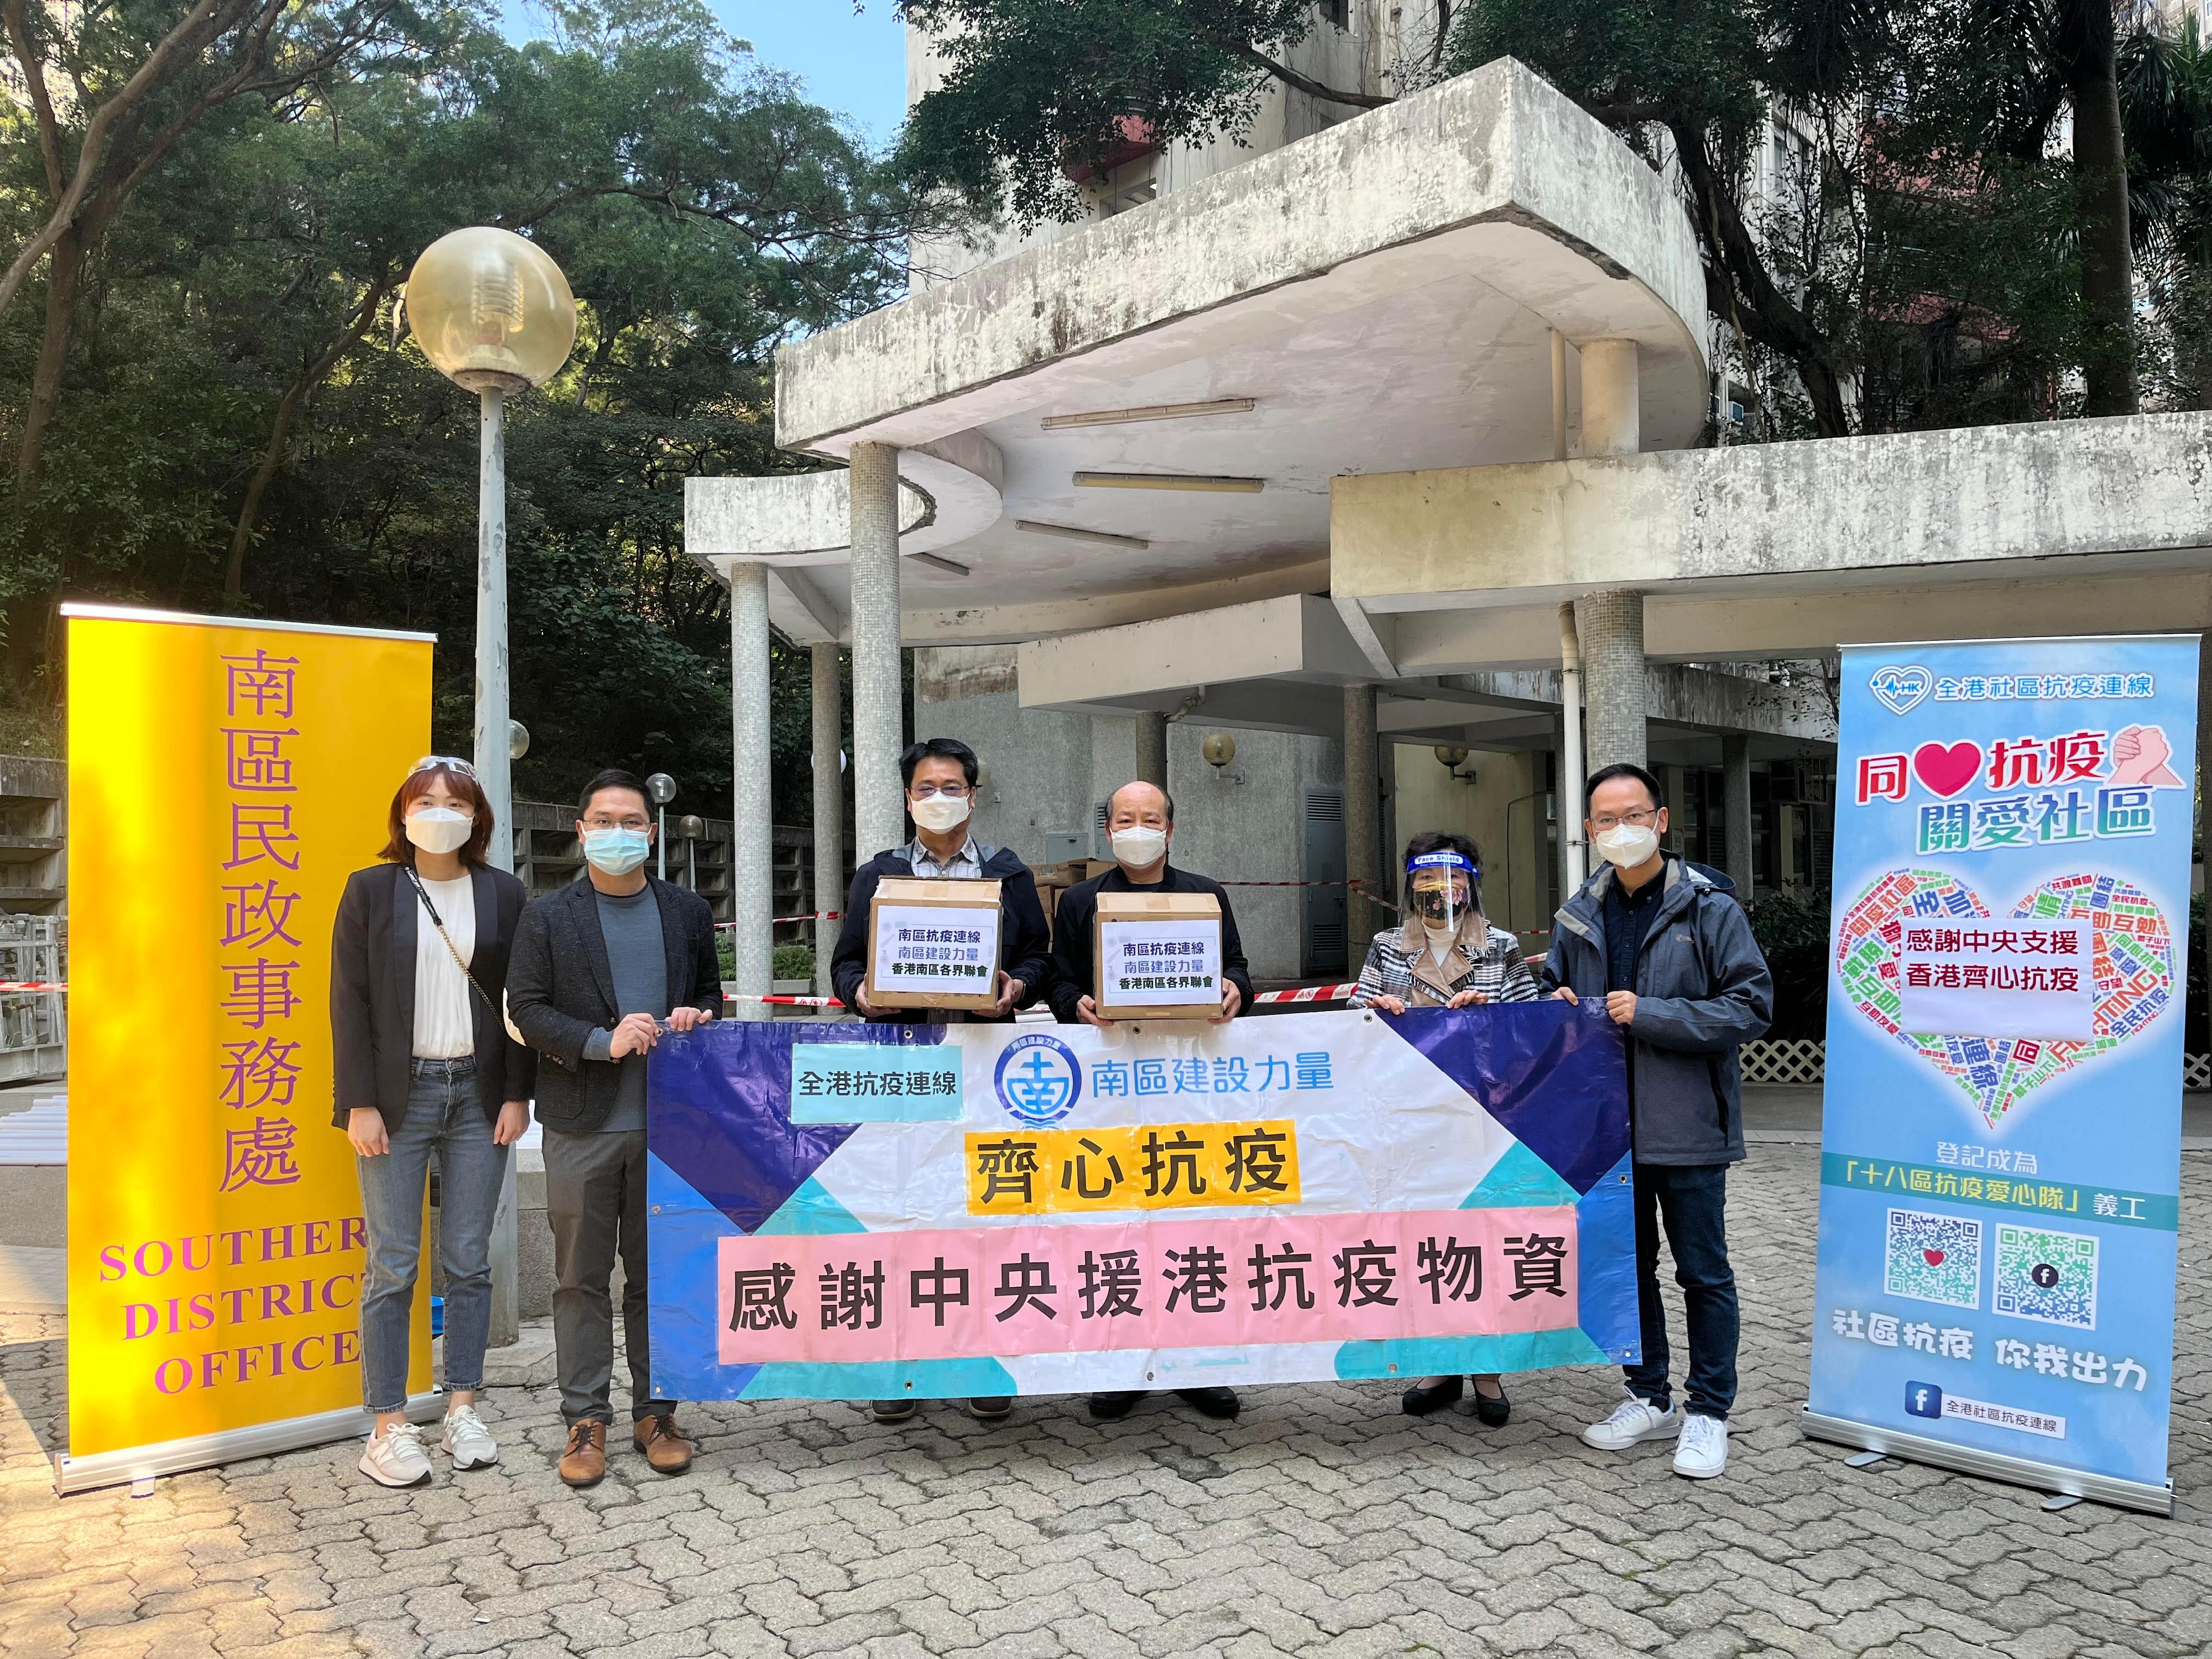 The Southern District Office, together with the Hong Kong Community Anti-Coronavirus Link, the  Hong Kong Southern District Community Association and district organisations, distributed COVID-19 rapid test kits to residents in various locations in the district, including Wah Kwai, Wah Fu, Shek Yue, Lei Tung, Wong Chuk Hang and Ap Lei Chau on February 27.

